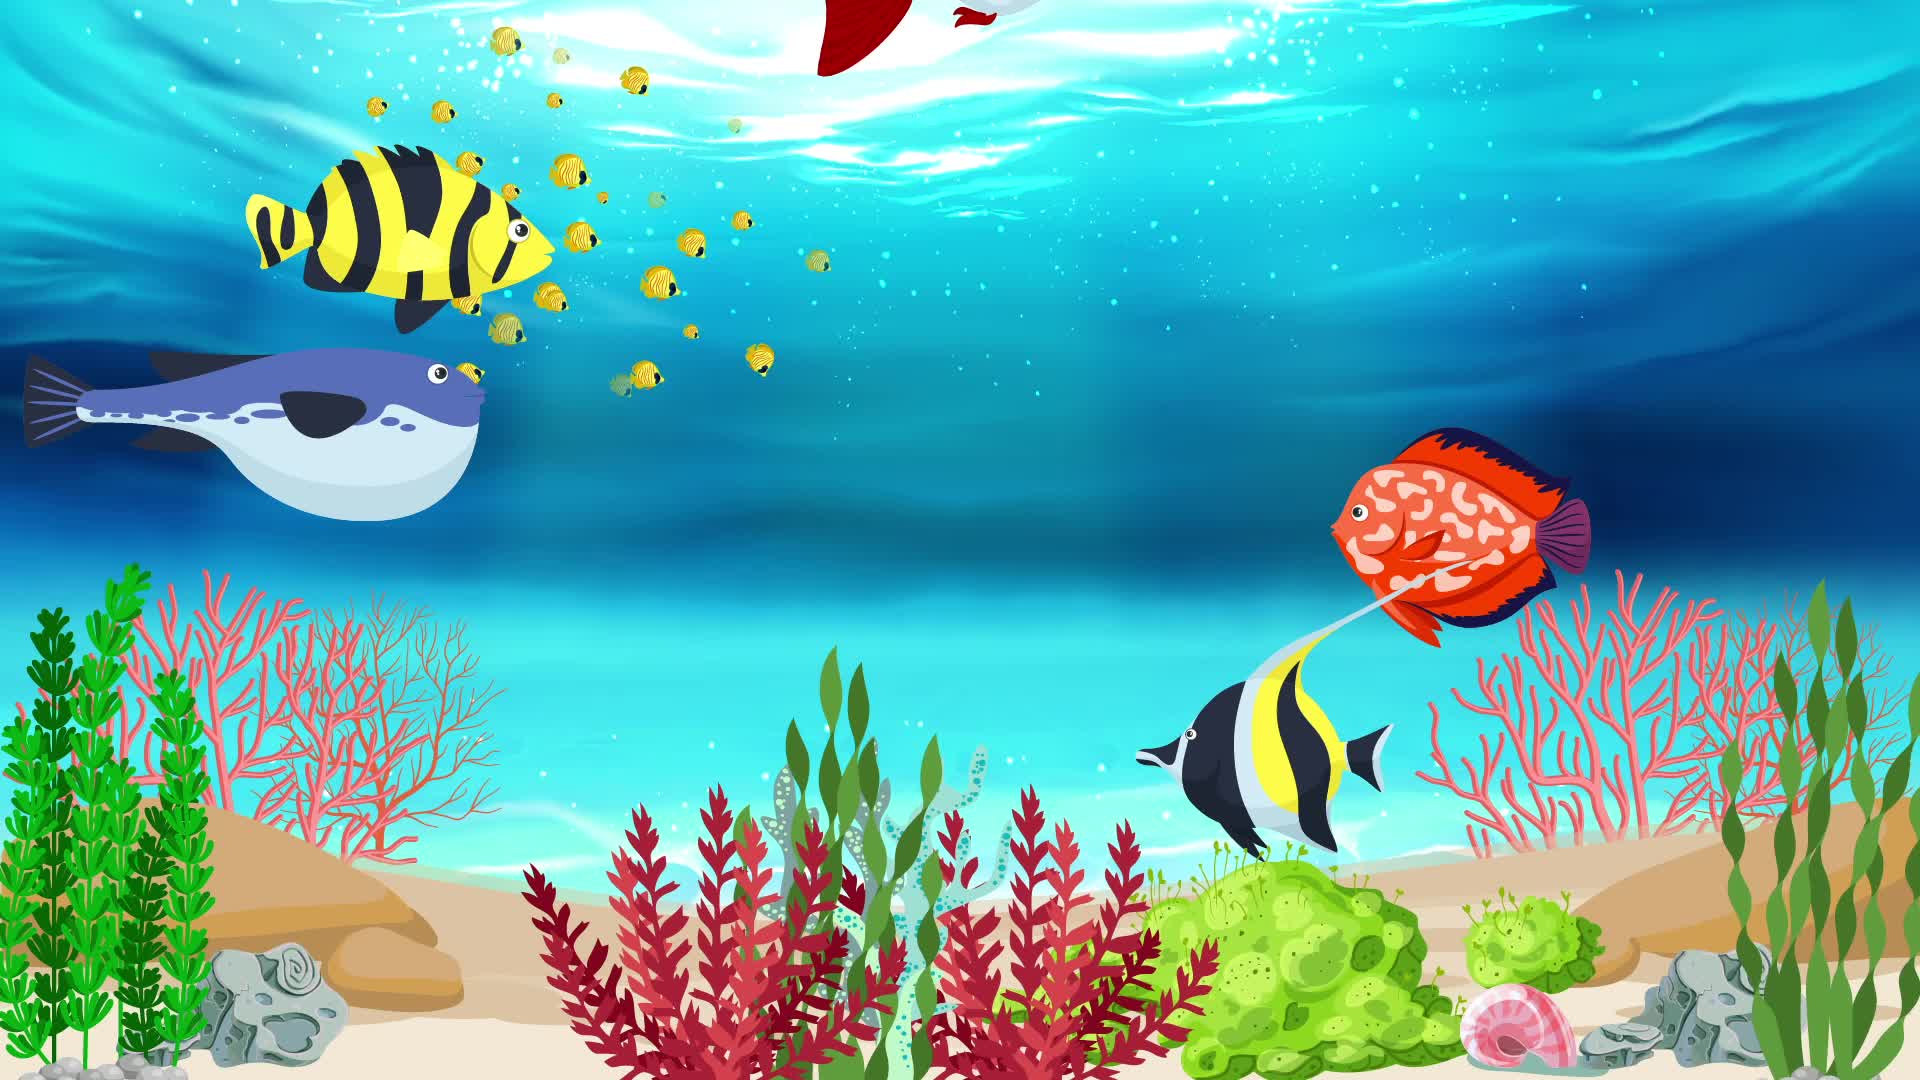 Fish Cartoon Stock Video Footage for Free Download